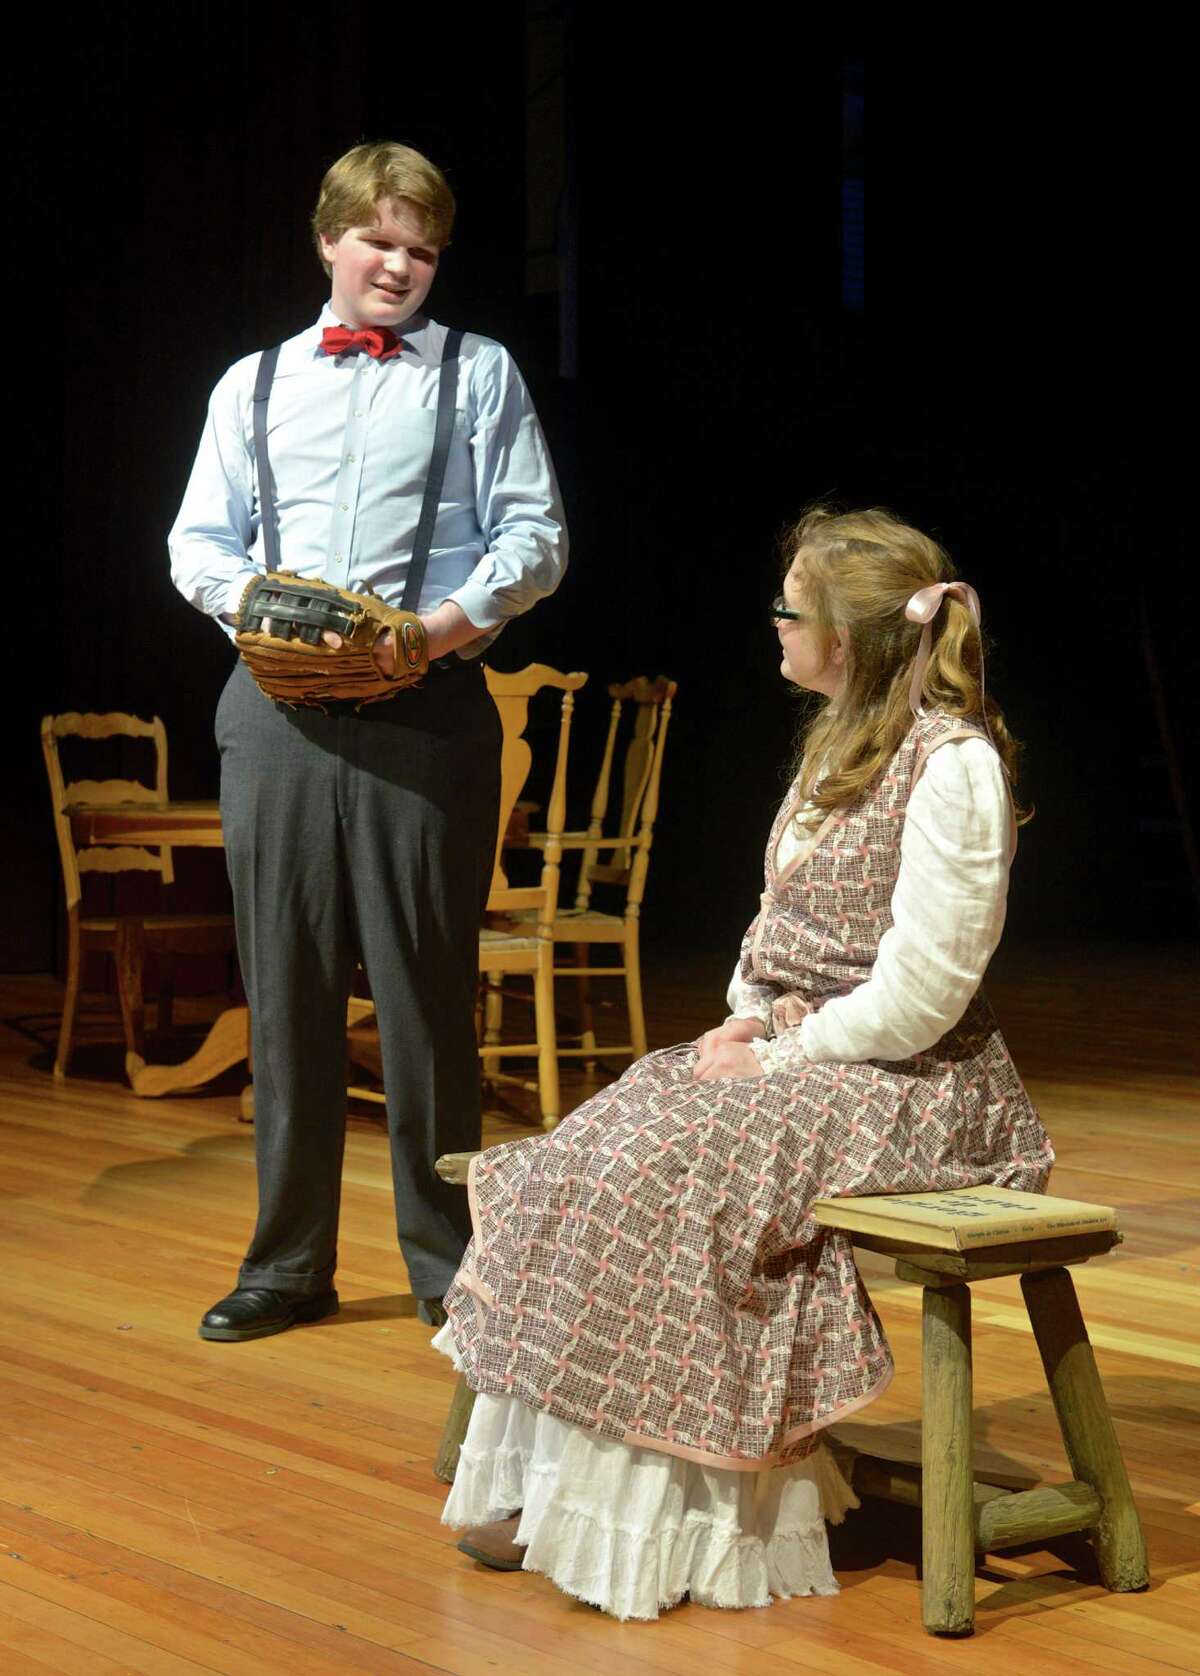 Daisy Navin plays Emily Webb and Alex Darlington plays George Gibbs during the dress rehearsal for Joel Barlow High School's production of "Our Town", by American playwright Thornton Wilder. Directed by Nancy Ponturo the play will be Friday and Saturday, May 29 and 30, at 8 P.M., and Sunday, May 31, at 2 P.M. at Joel Barlow. Tickets are available at the door, $10 for Adults and $5 for students and seniors. There are over 40 Barlow students involved in the production. On Thursday, May 28, 2015, in Redding, Conn.